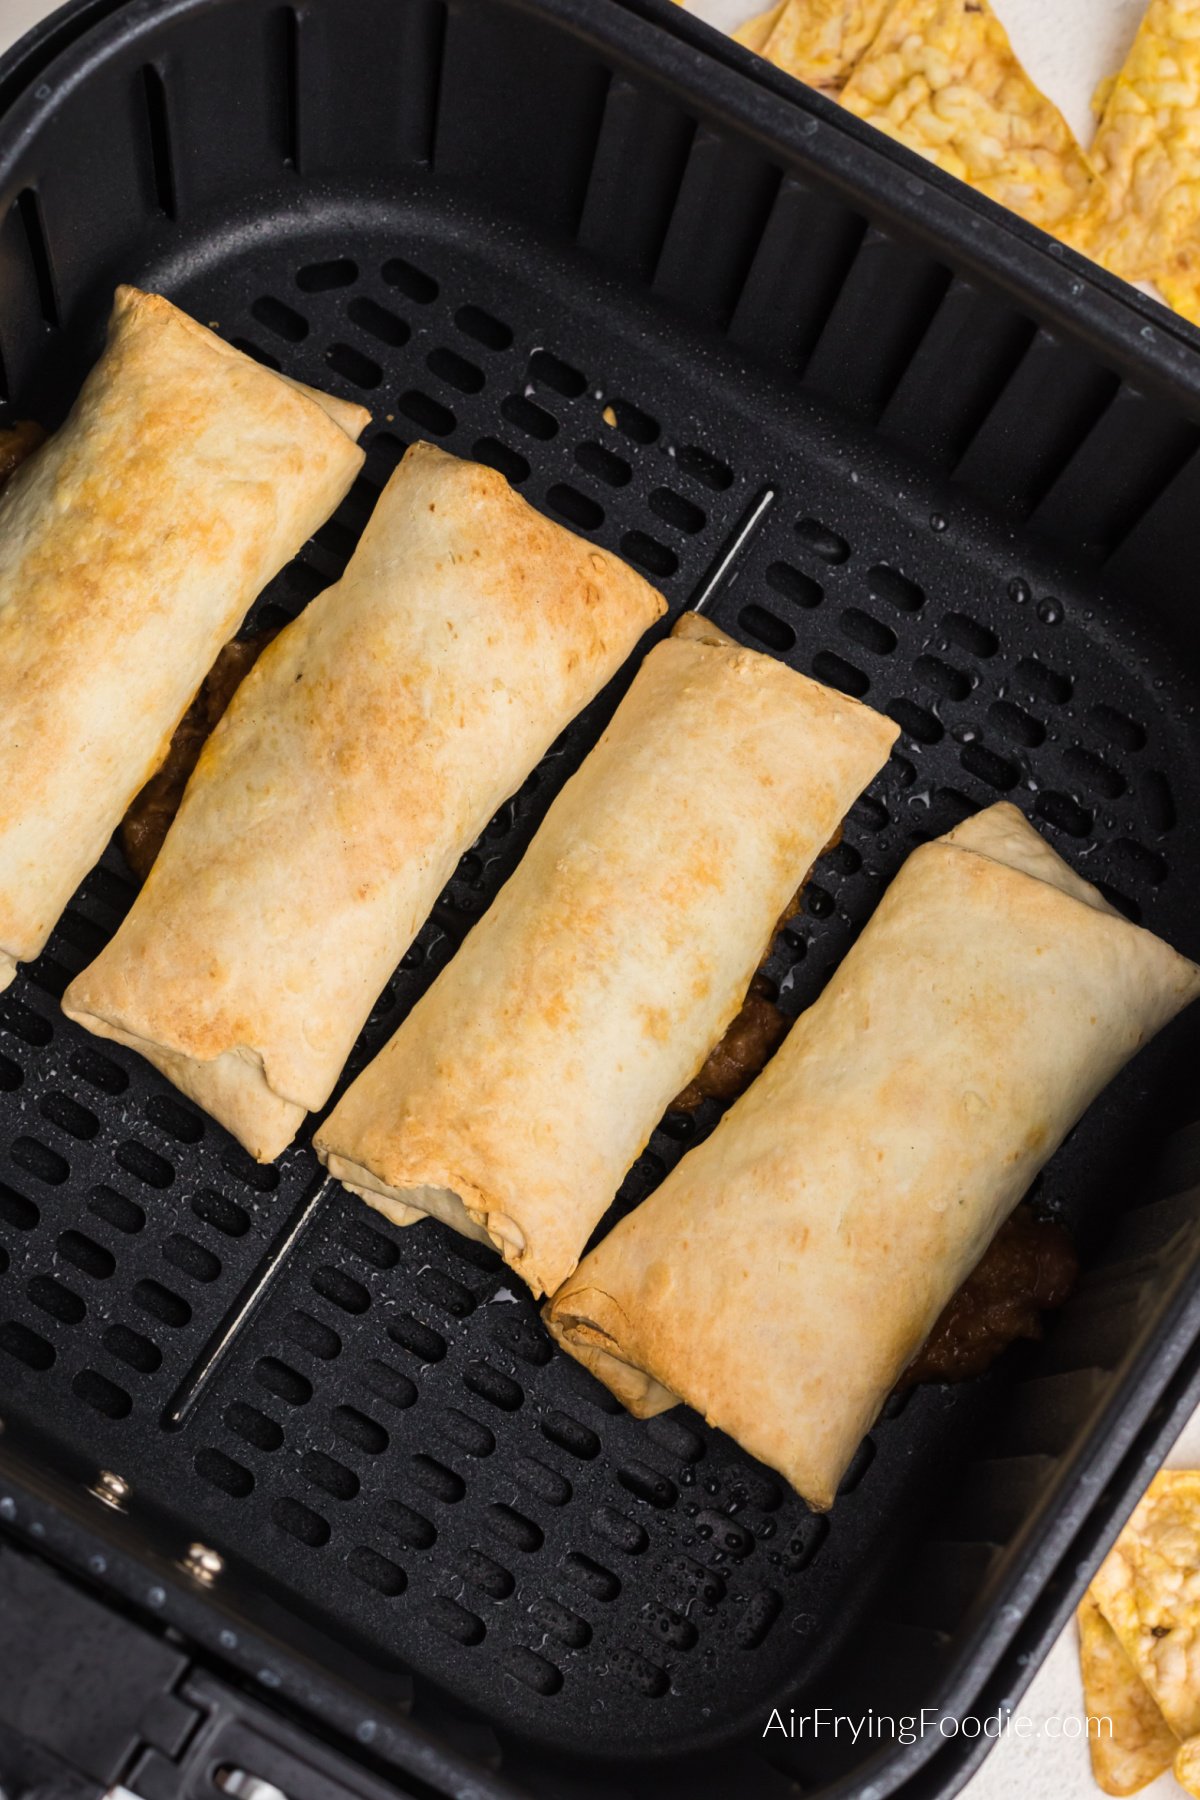 Beef and bean burritos air fried in the basket of the air fryer.